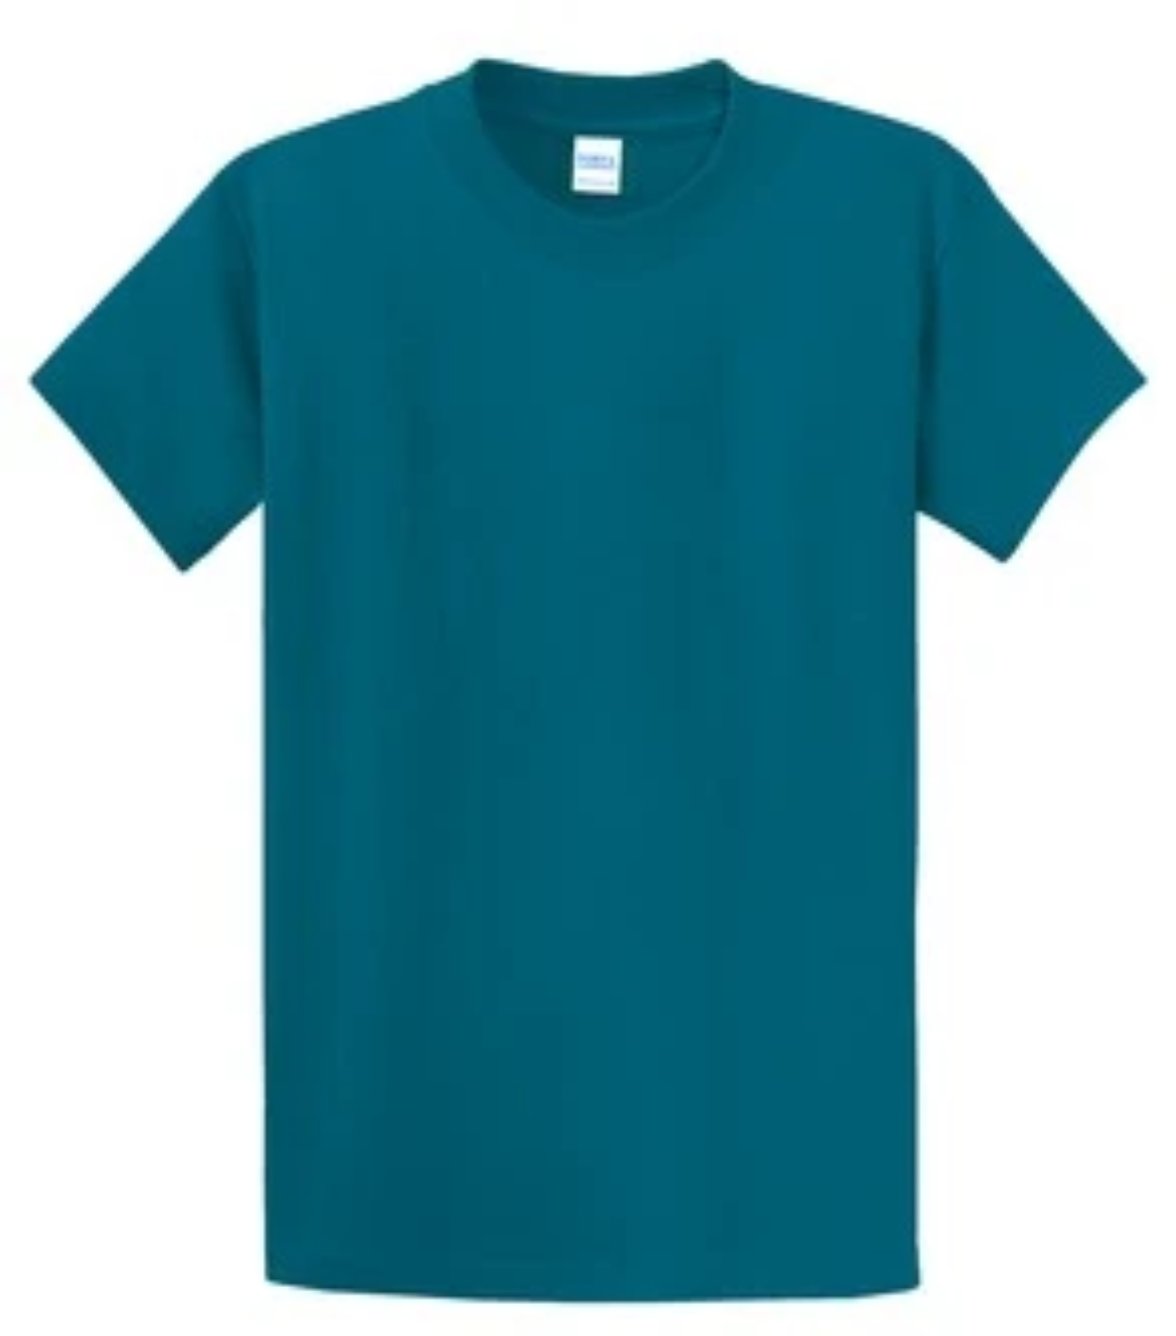 Port & Company 100% Cotton Essential T-Shirt Teal PC61